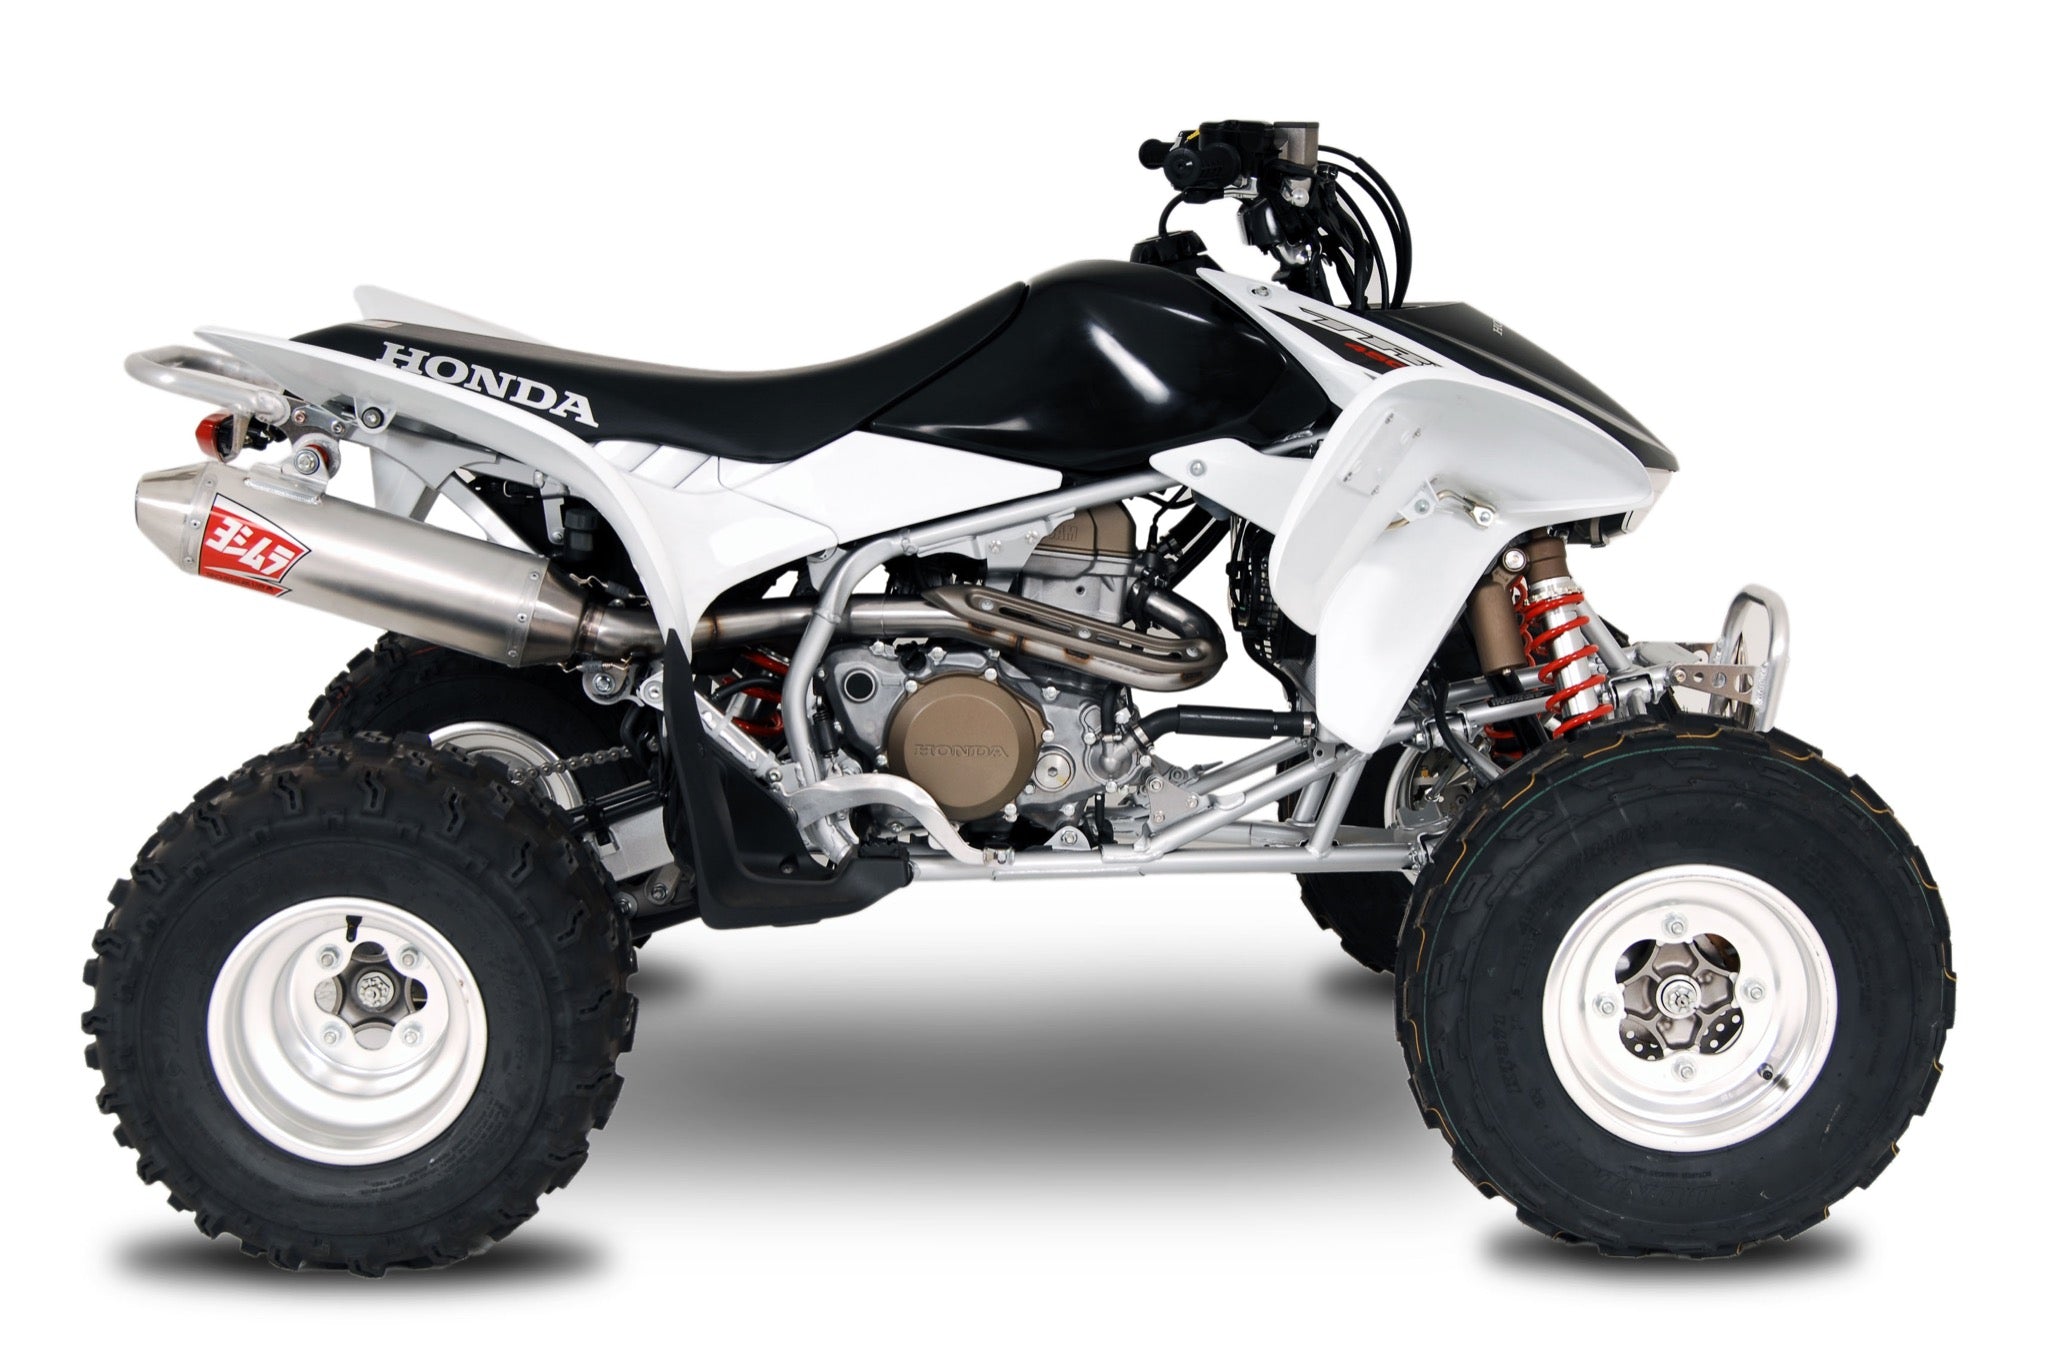 R5 Trx450r Full System 04-05 with Anti-reversion chamber